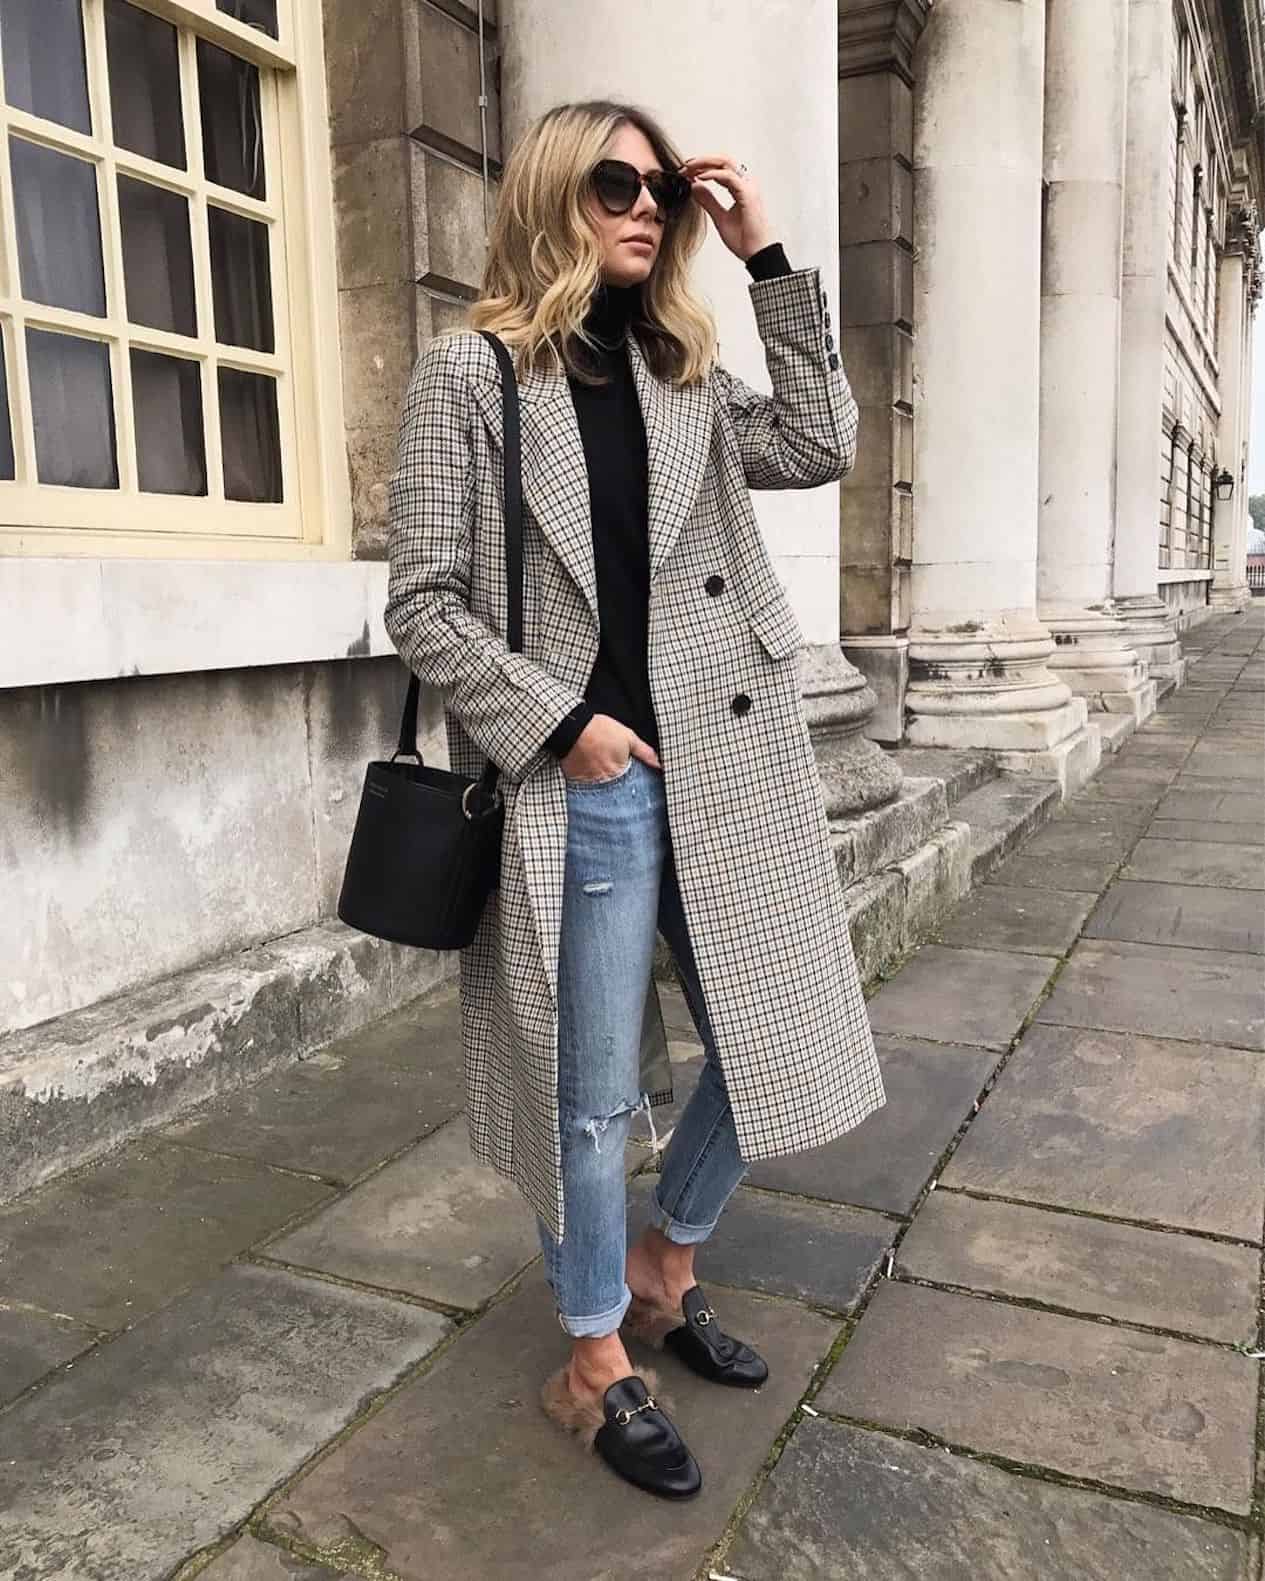 image of a woman standing on a sidewalk wearing a long grey trench coat, jeans, and a pair of Gucci mules